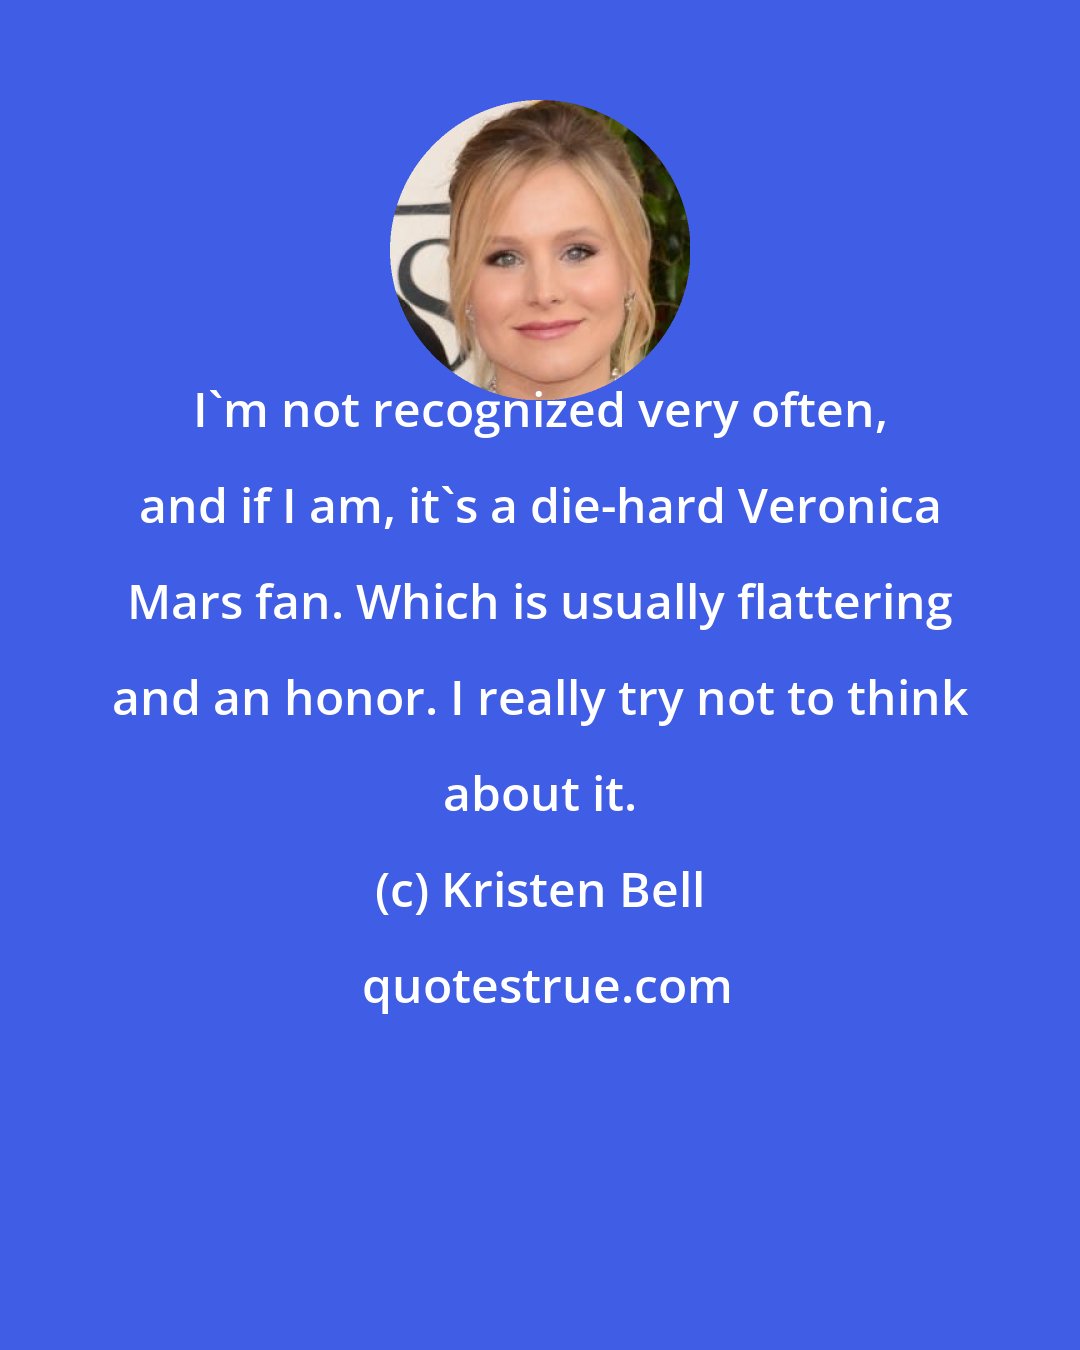 Kristen Bell: I'm not recognized very often, and if I am, it's a die-hard Veronica Mars fan. Which is usually flattering and an honor. I really try not to think about it.